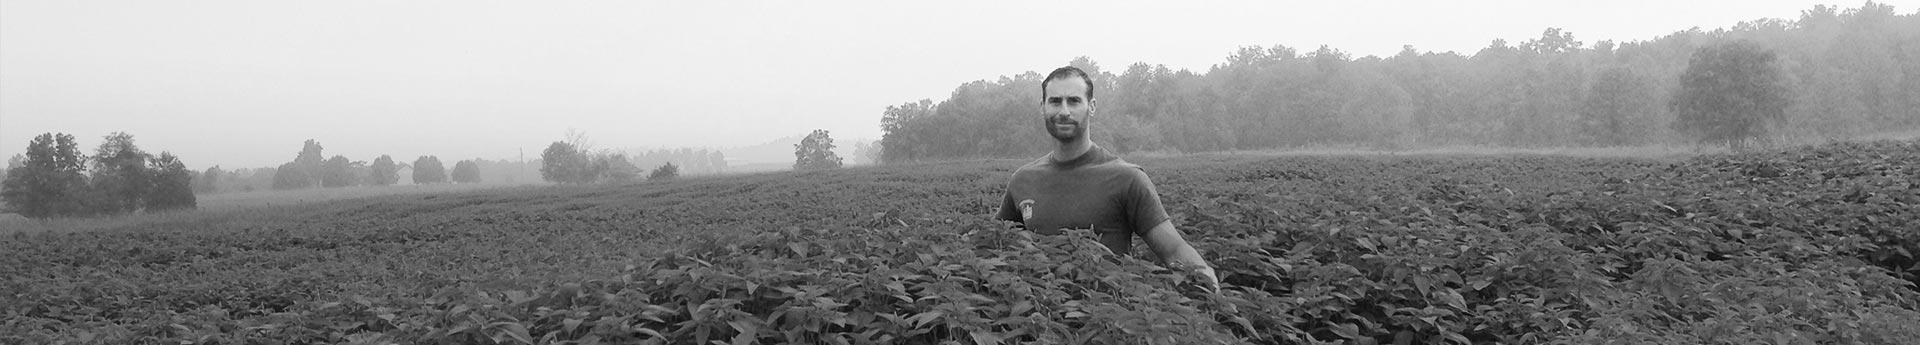 John of Roundstone Native Seed in Upton, Kentucky. Trusted botanical supplier.